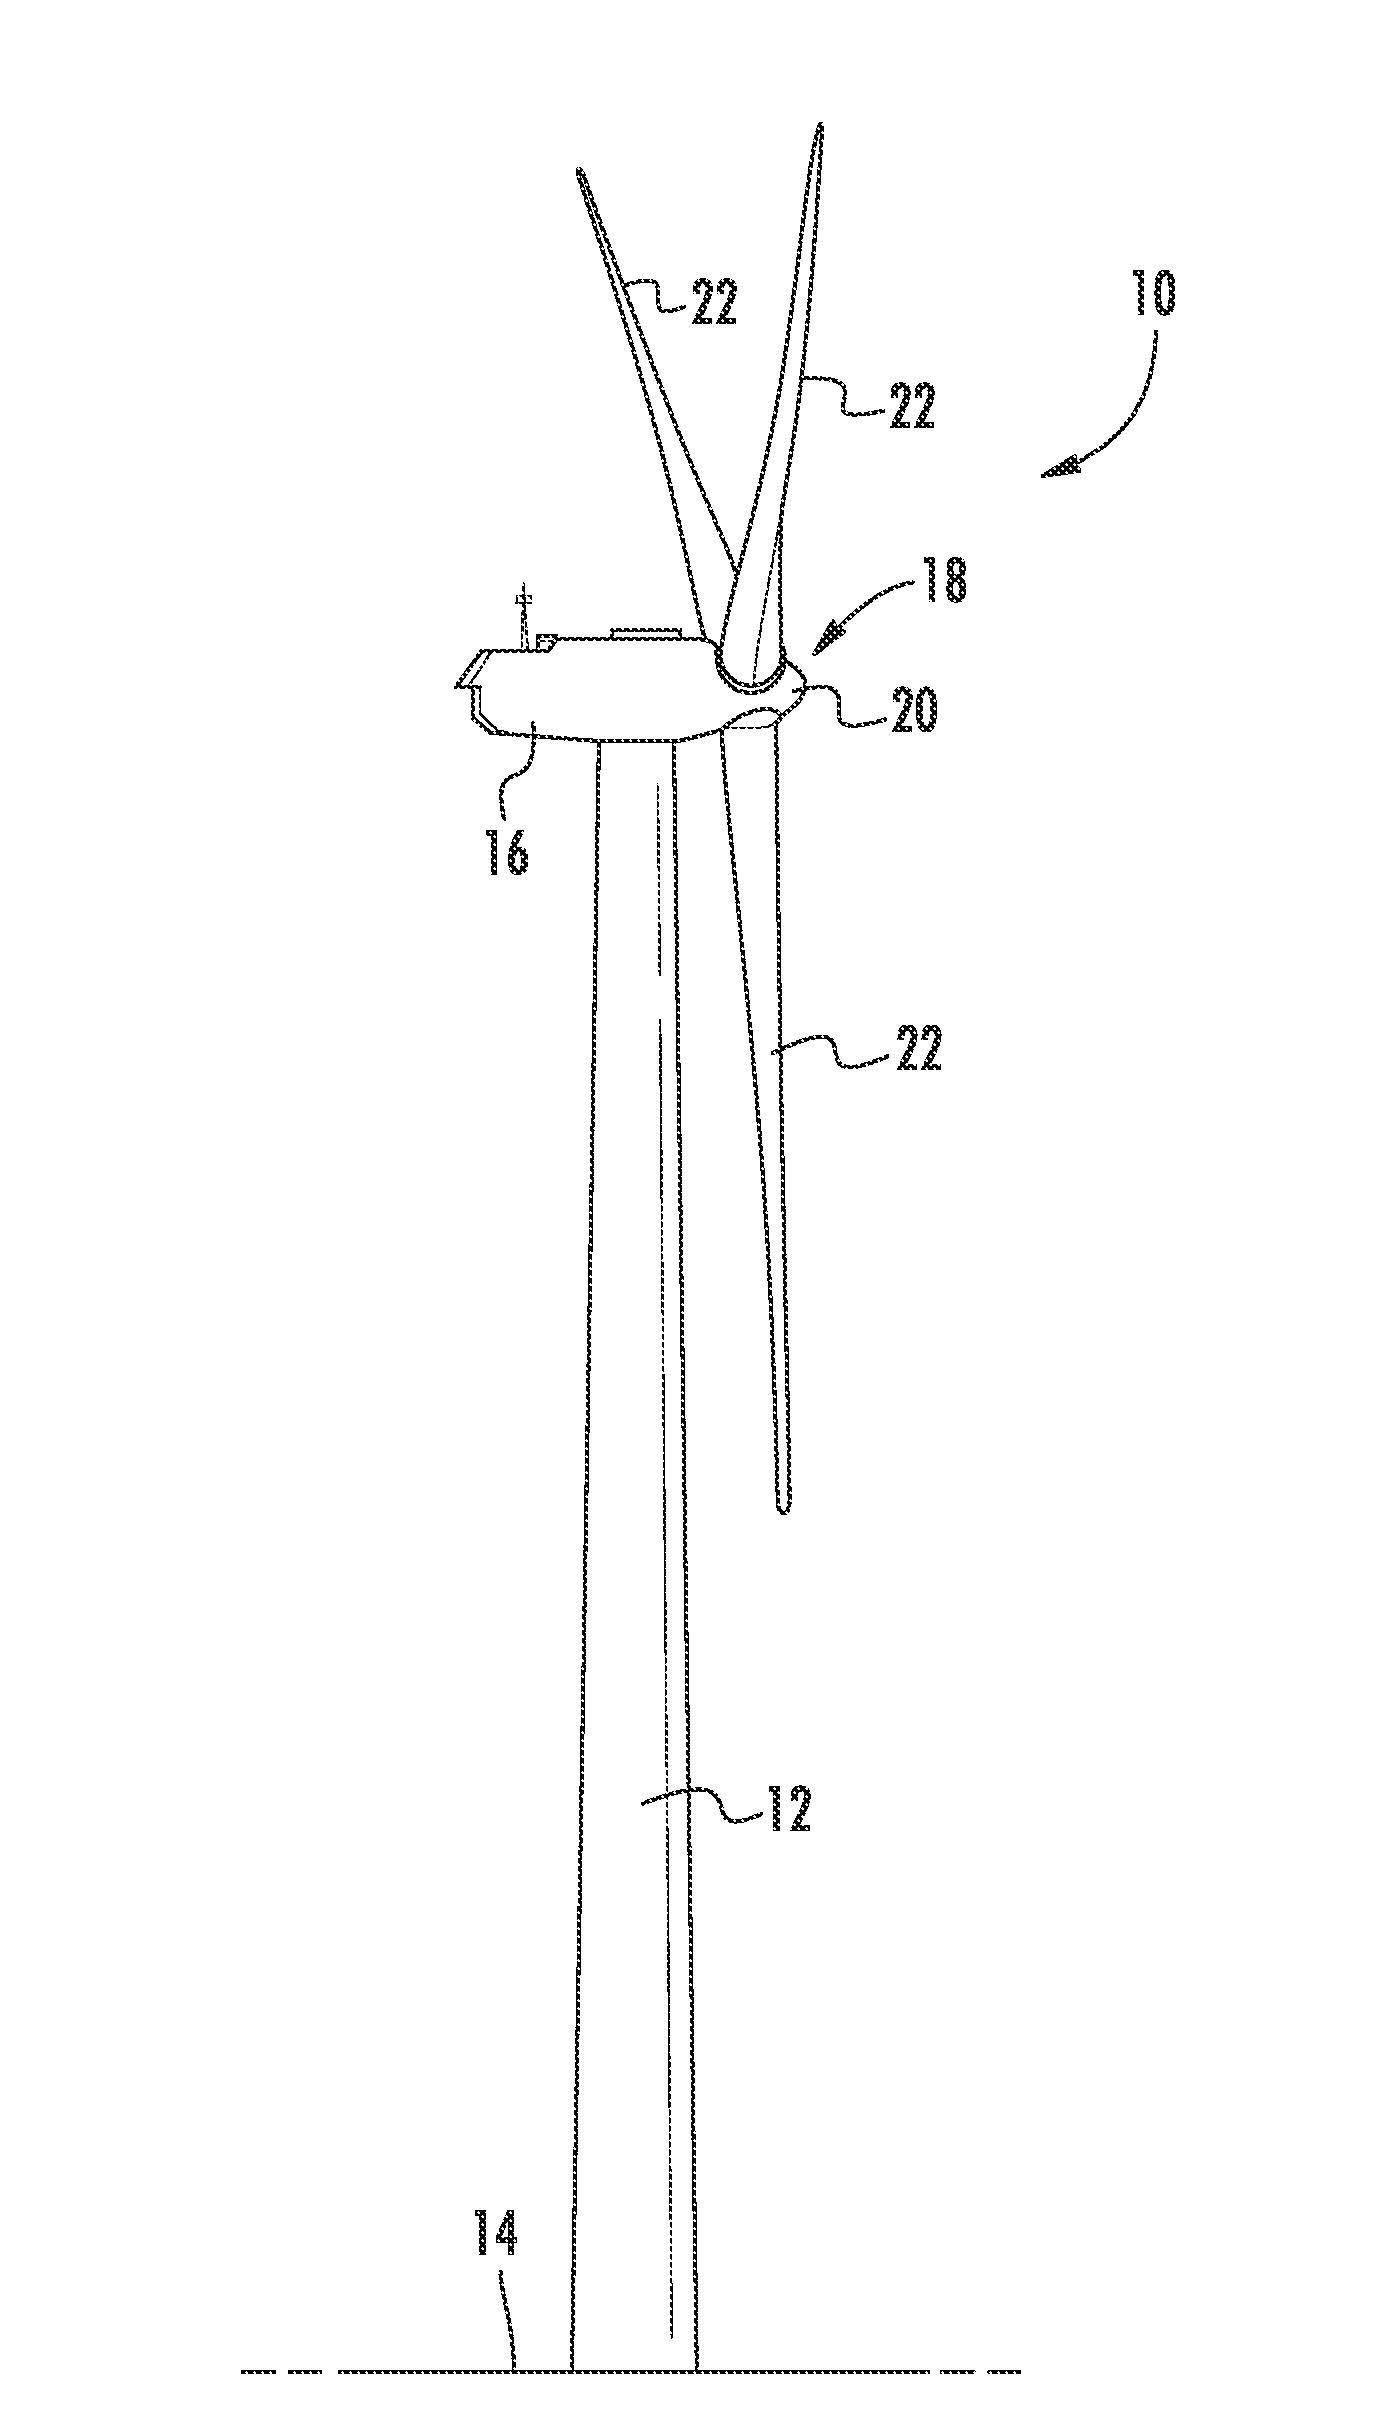 Rotor blade assembly having a stiffening root insert